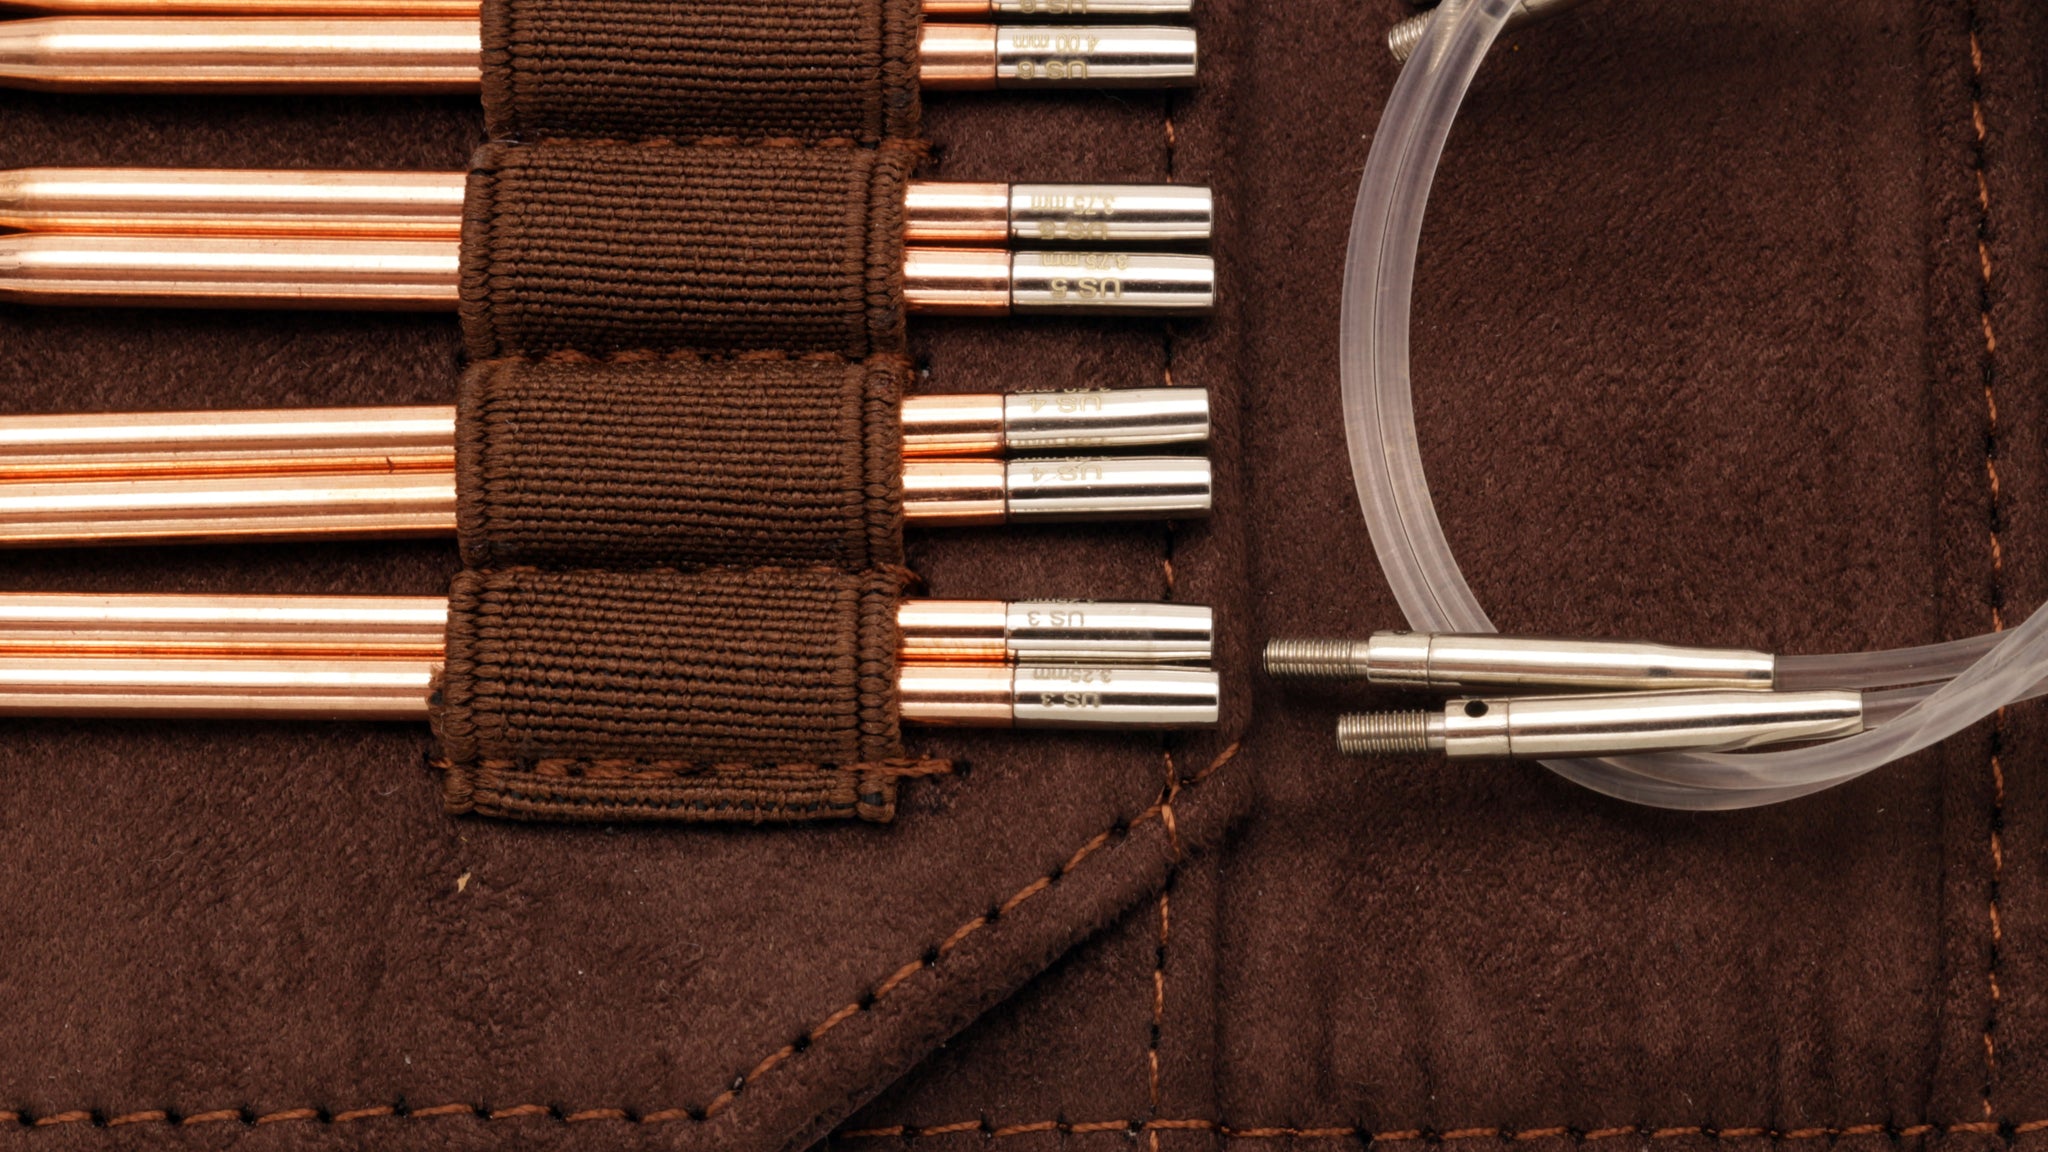 Lykke Copper Needle Set Review — Real Knitting & Yoga